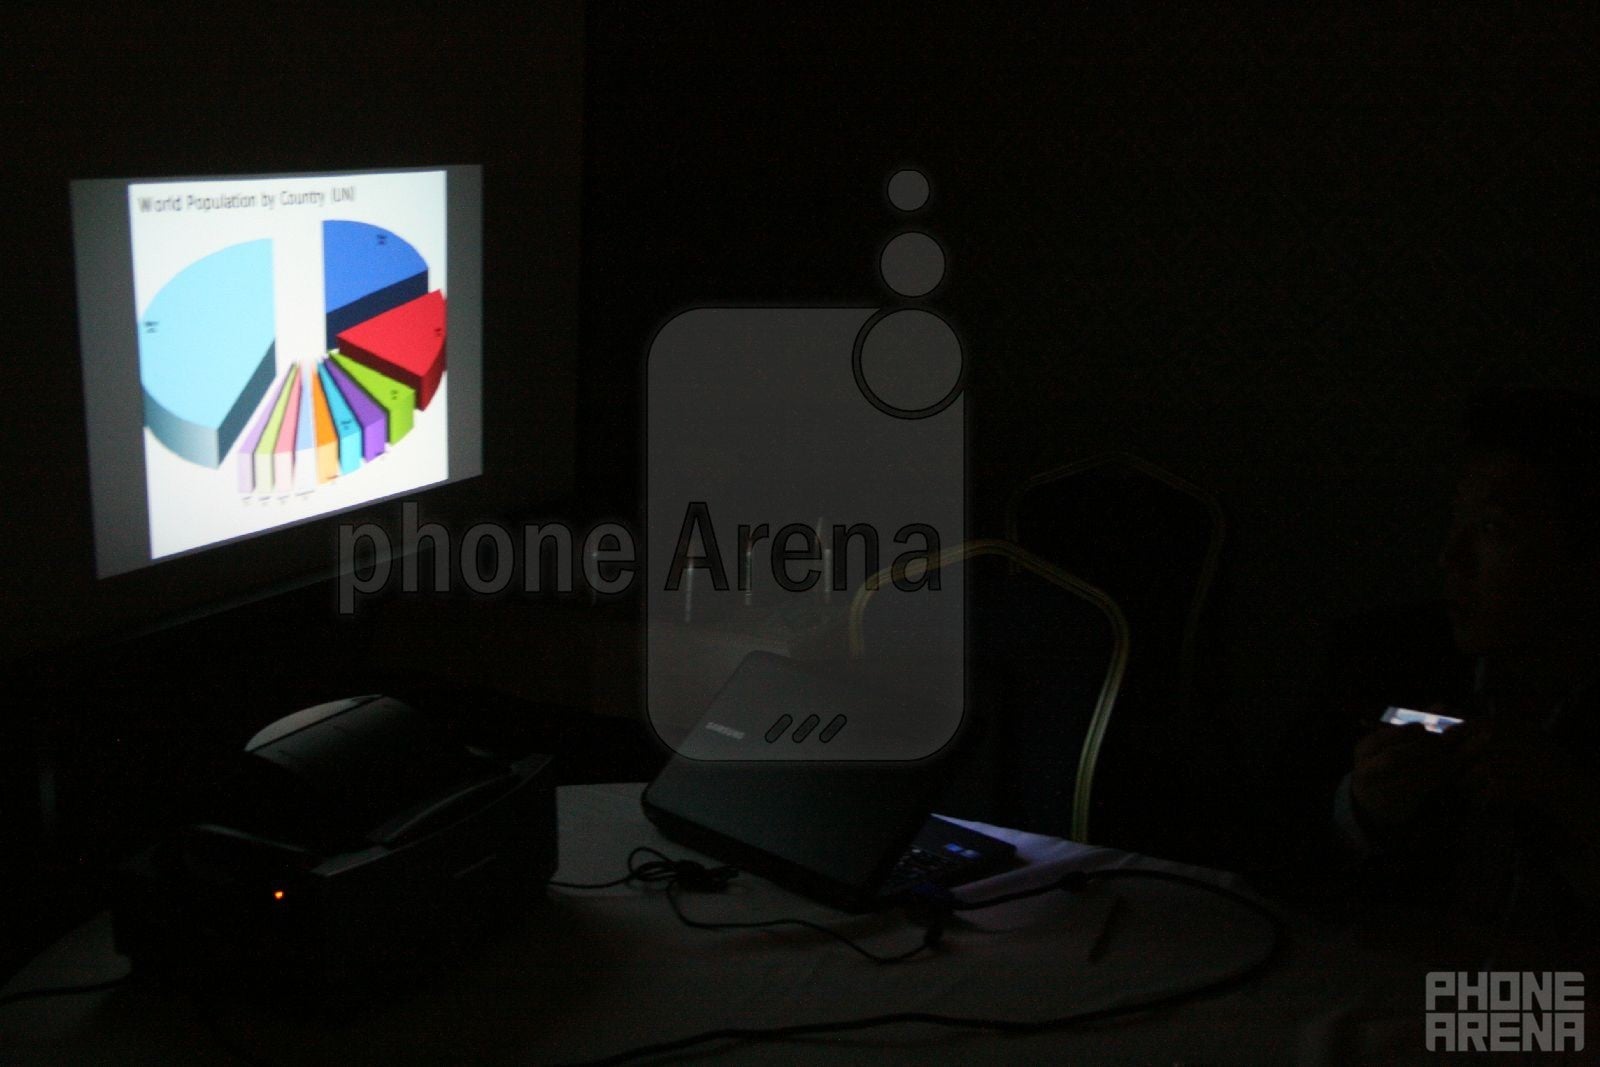 Presentation on the wall - Using the projector in a dark room - Samsung Galaxy Beam Hands-on Review